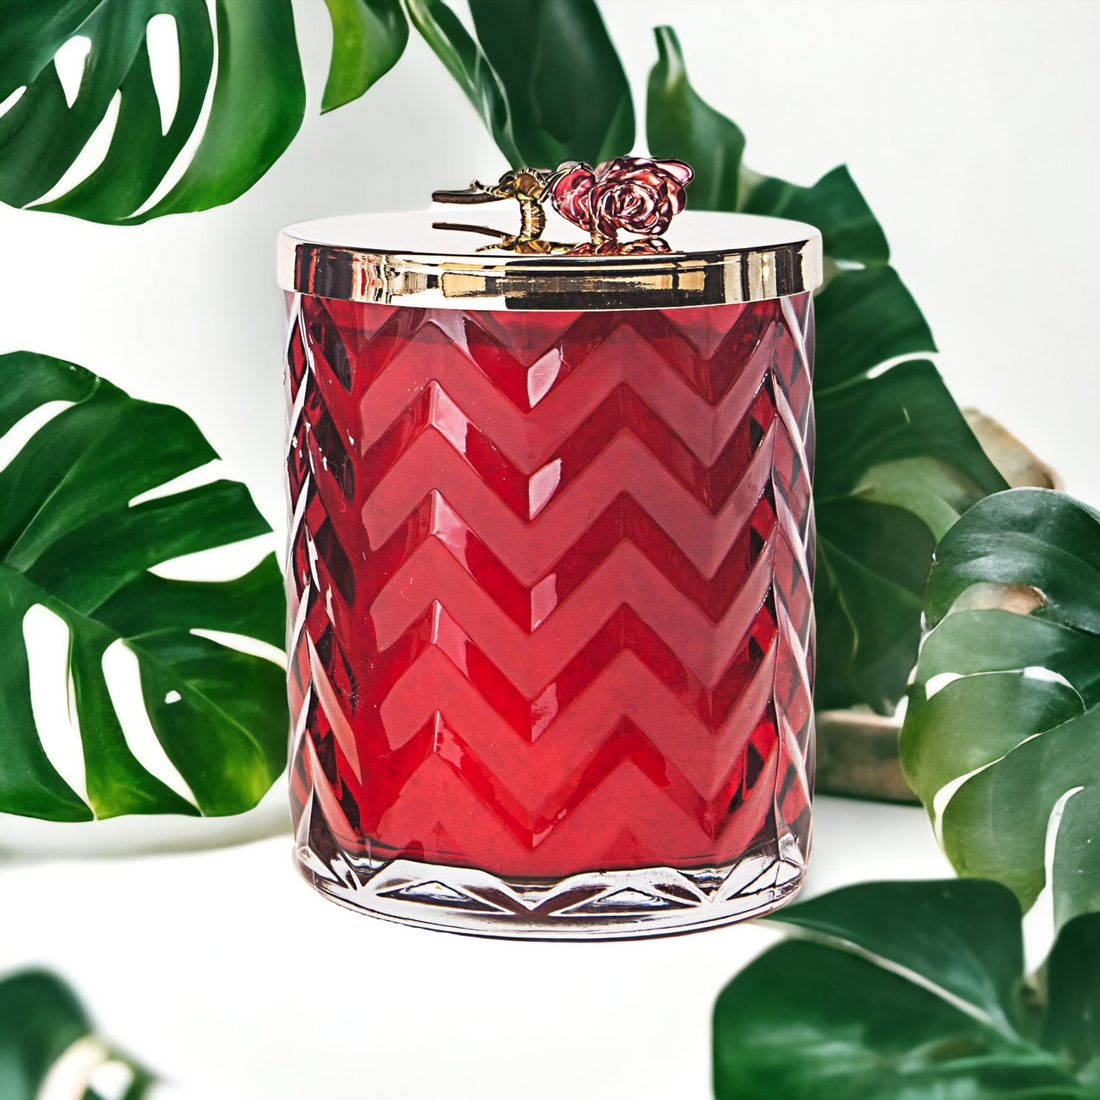 Cote Noire Red Herringbone Candle with Scarf